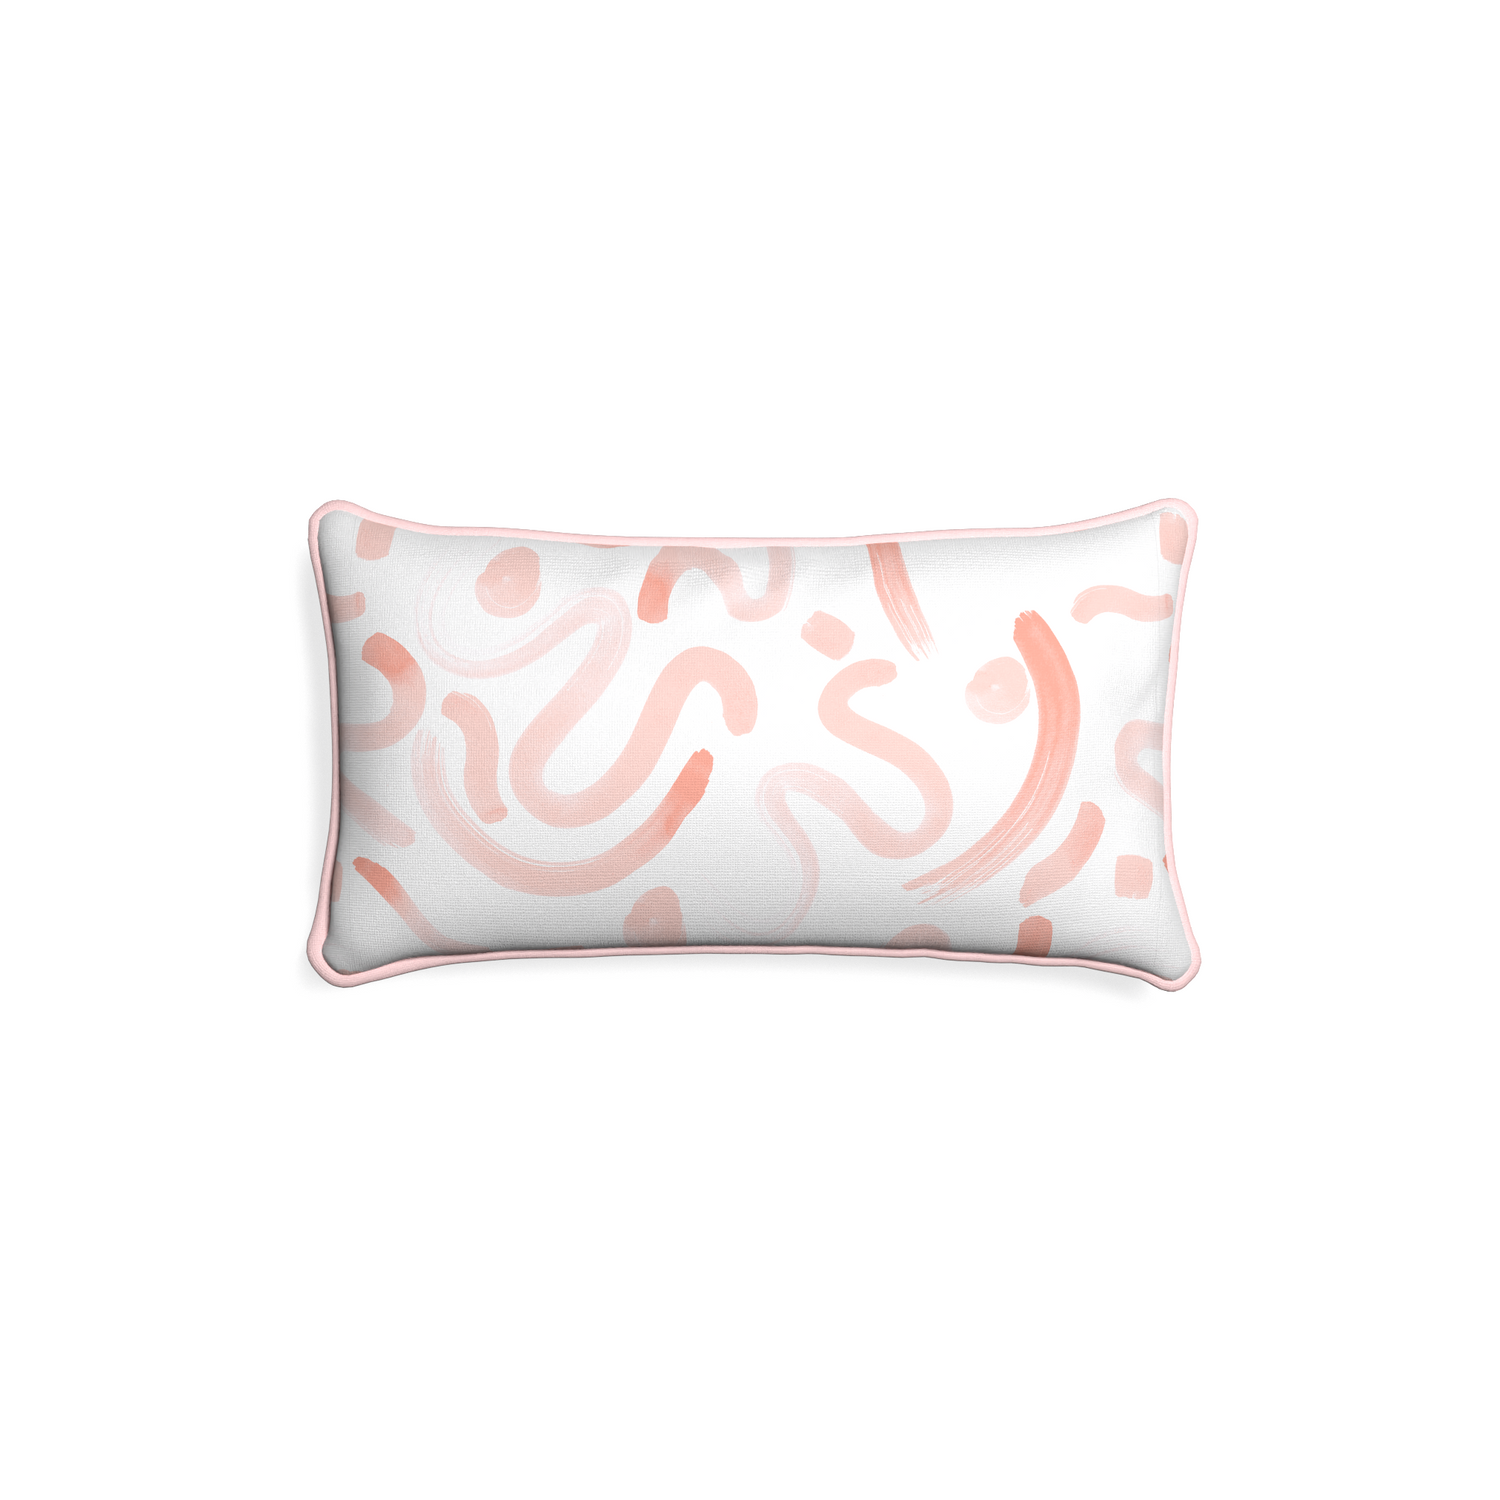 Petite-lumbar hockney pink custom pink graphicpillow with petal piping on white background